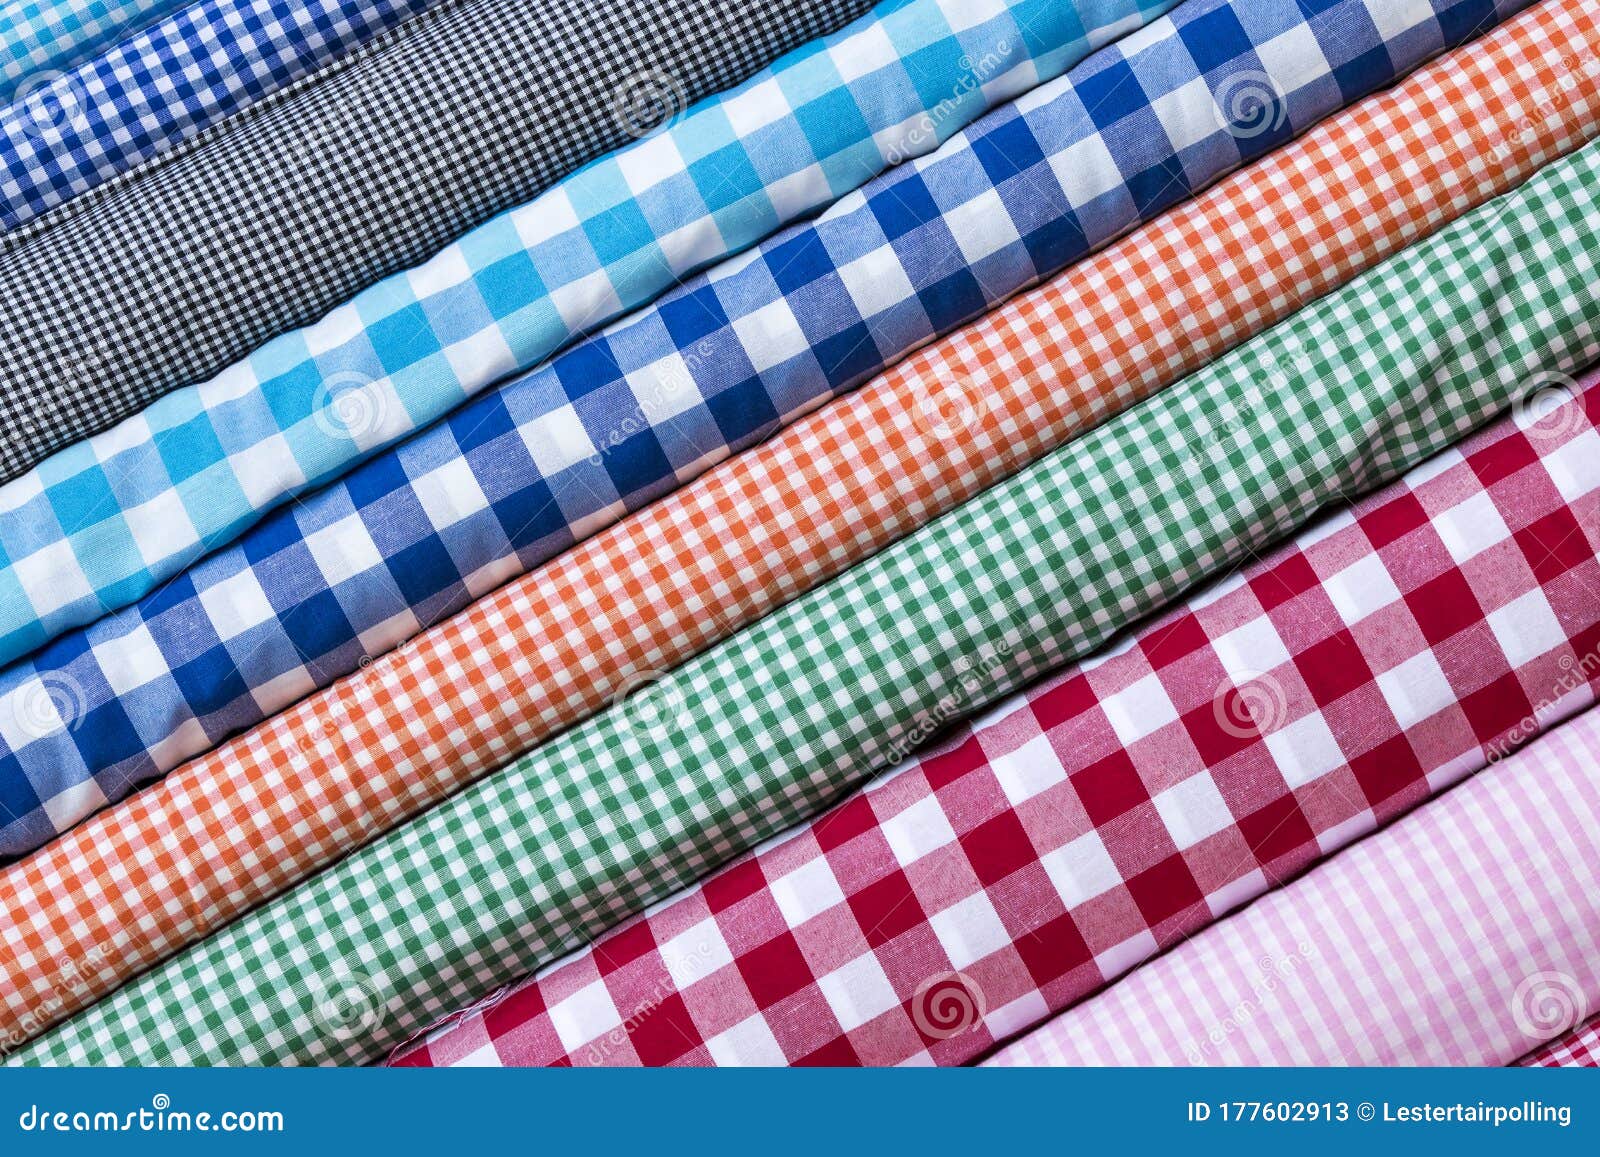 Colorful Fabric Scarves in Stack Stock Image - Image of background ...